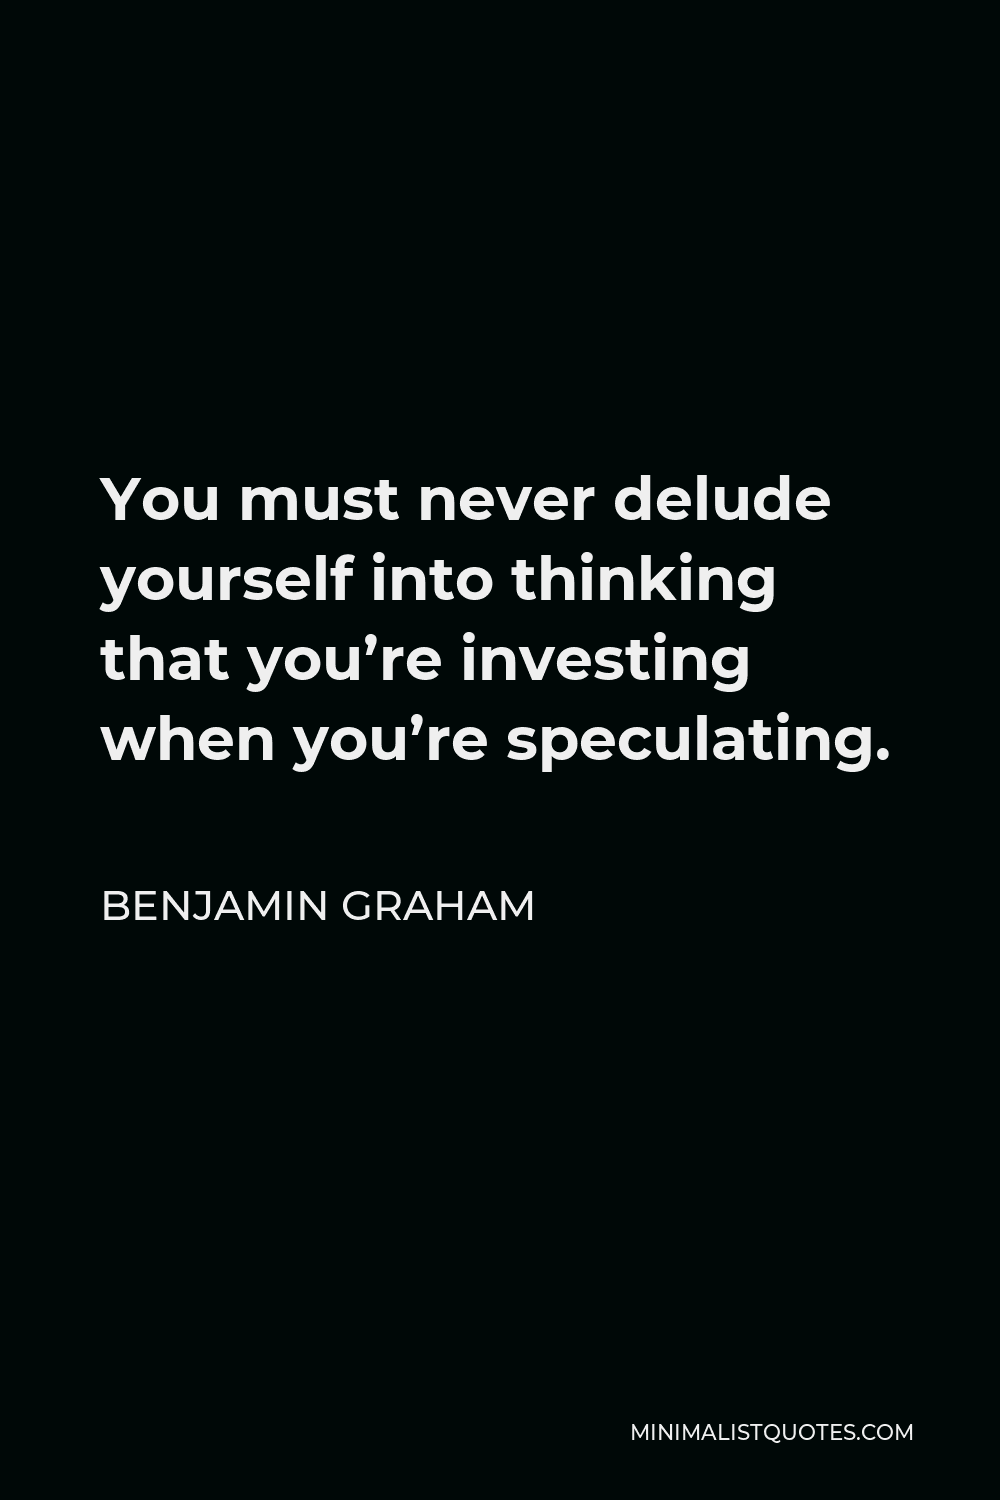 Benjamin Graham Quote - You must never delude yourself into thinking that you’re investing when you’re speculating.